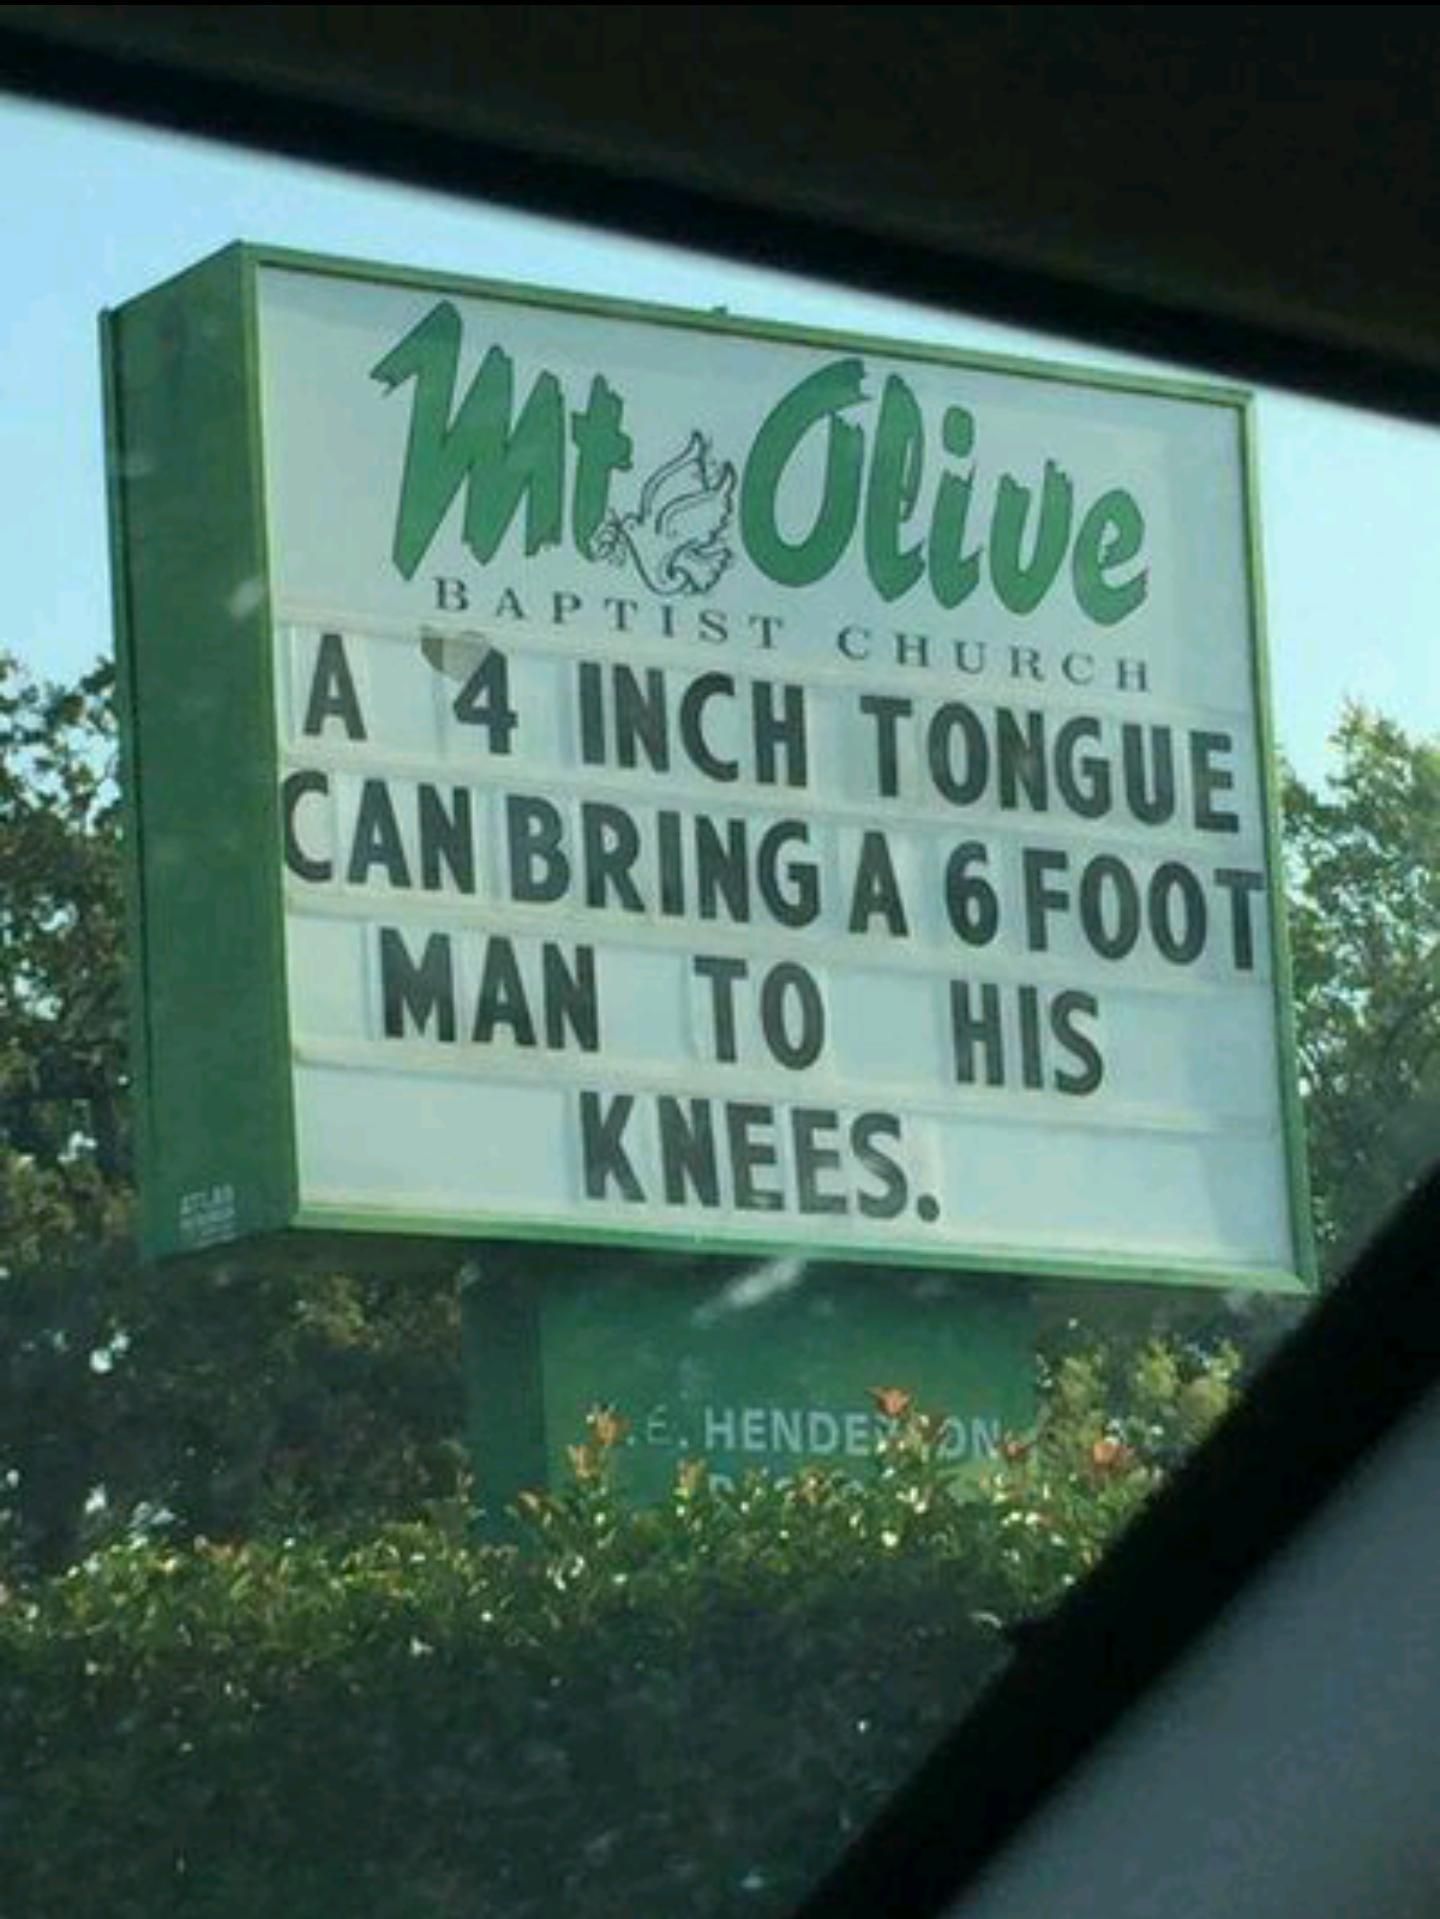 So, is this the stuff they teach at church now?